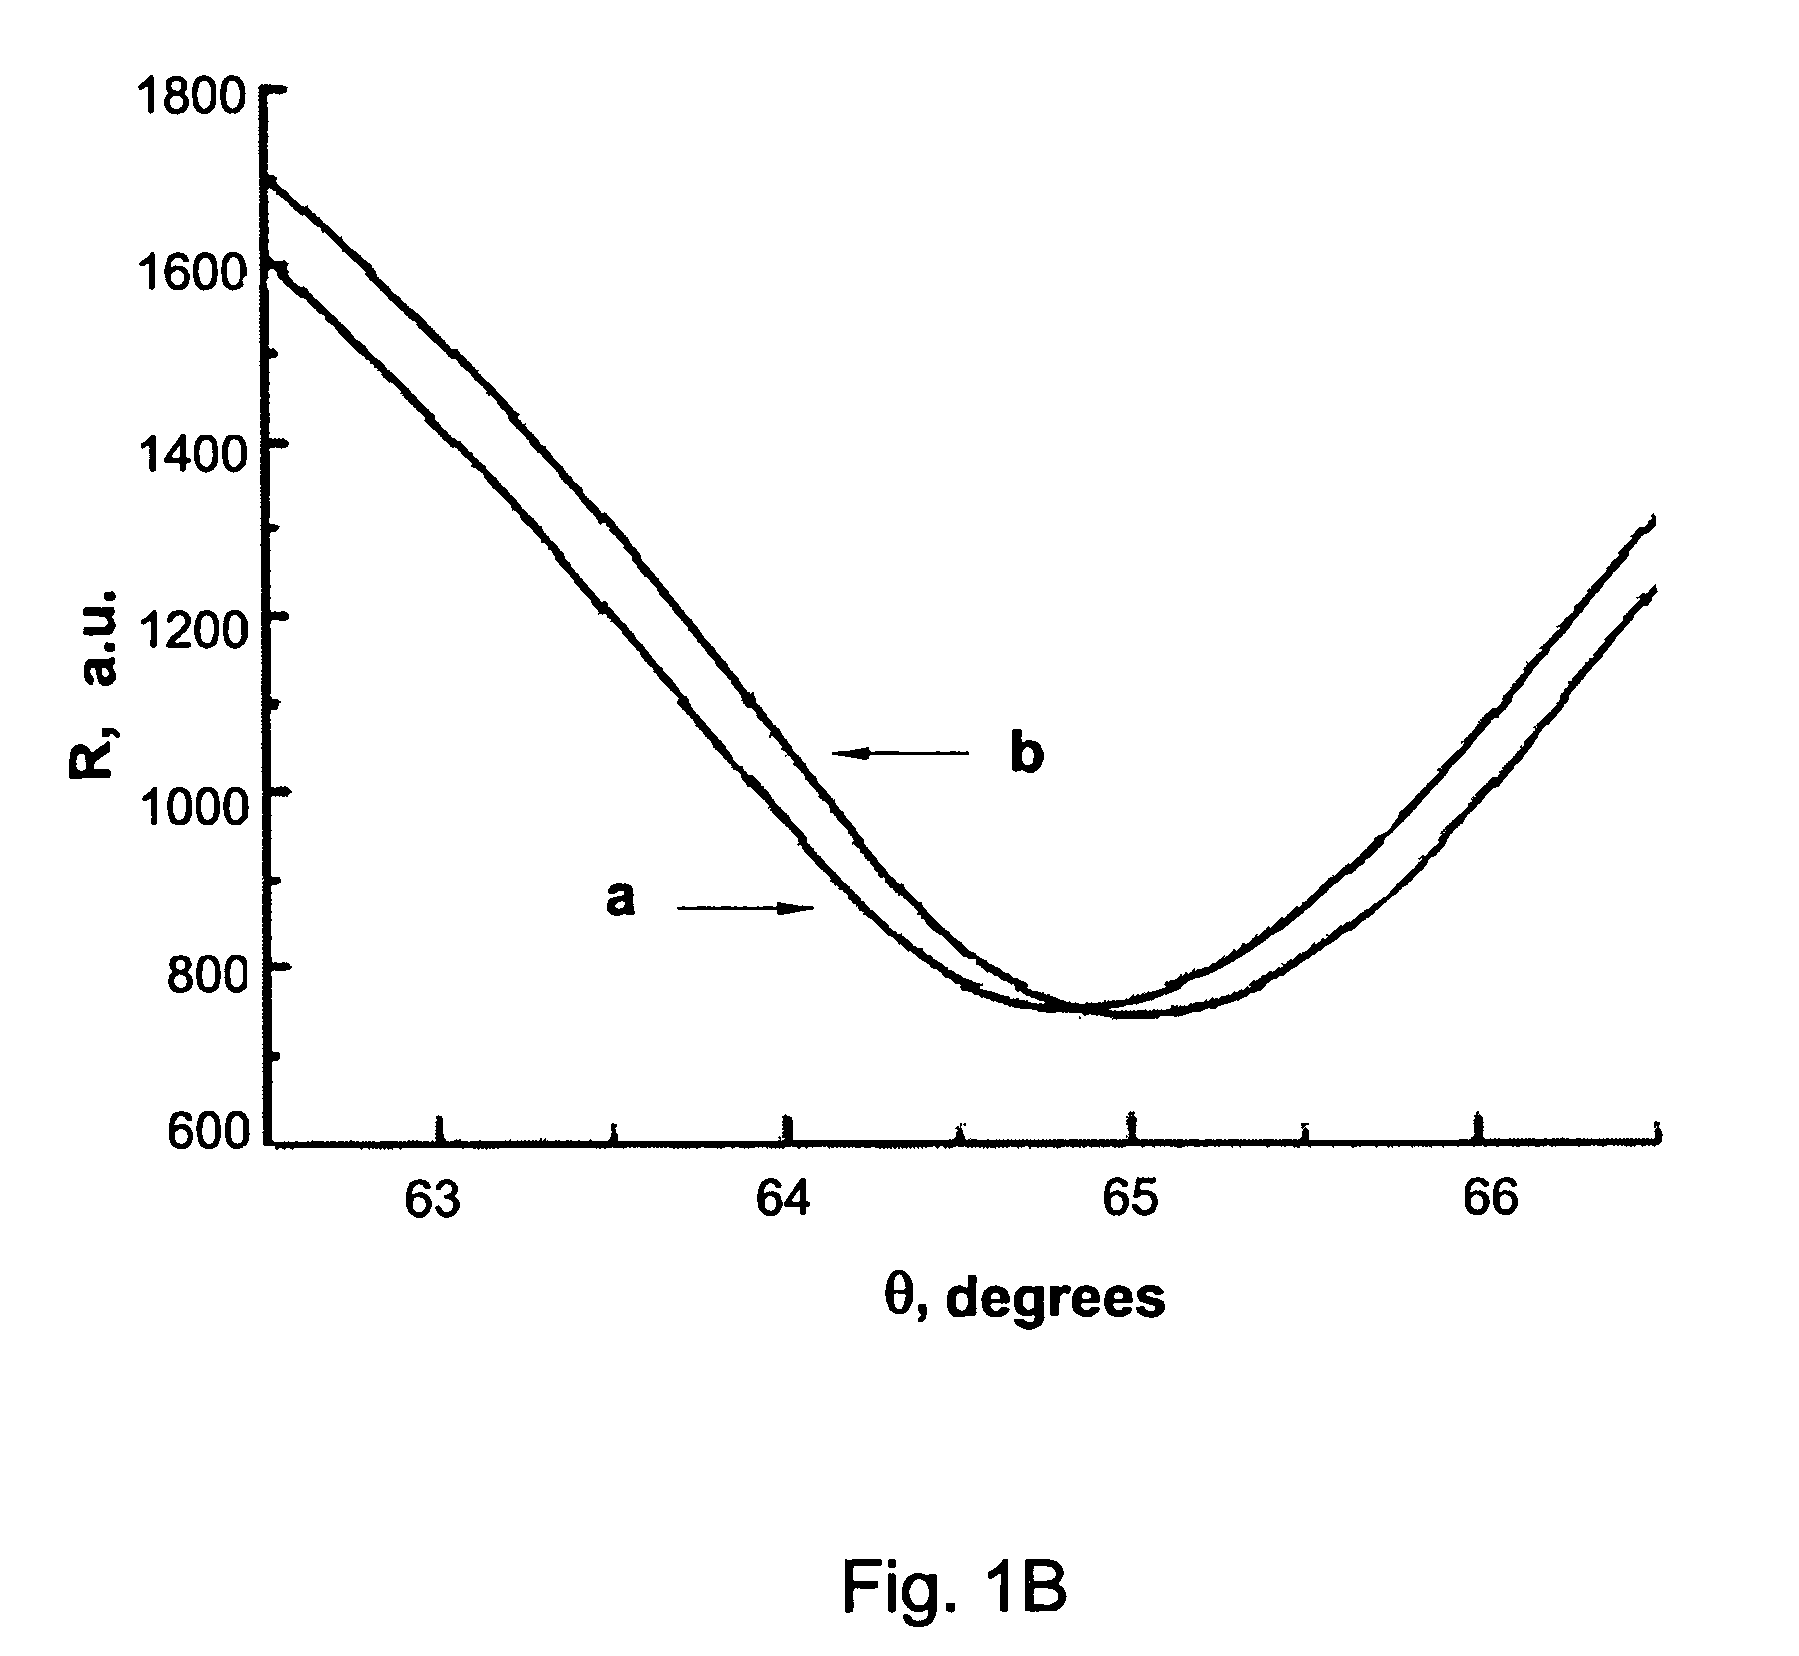 Method and device for detection of nitroamines